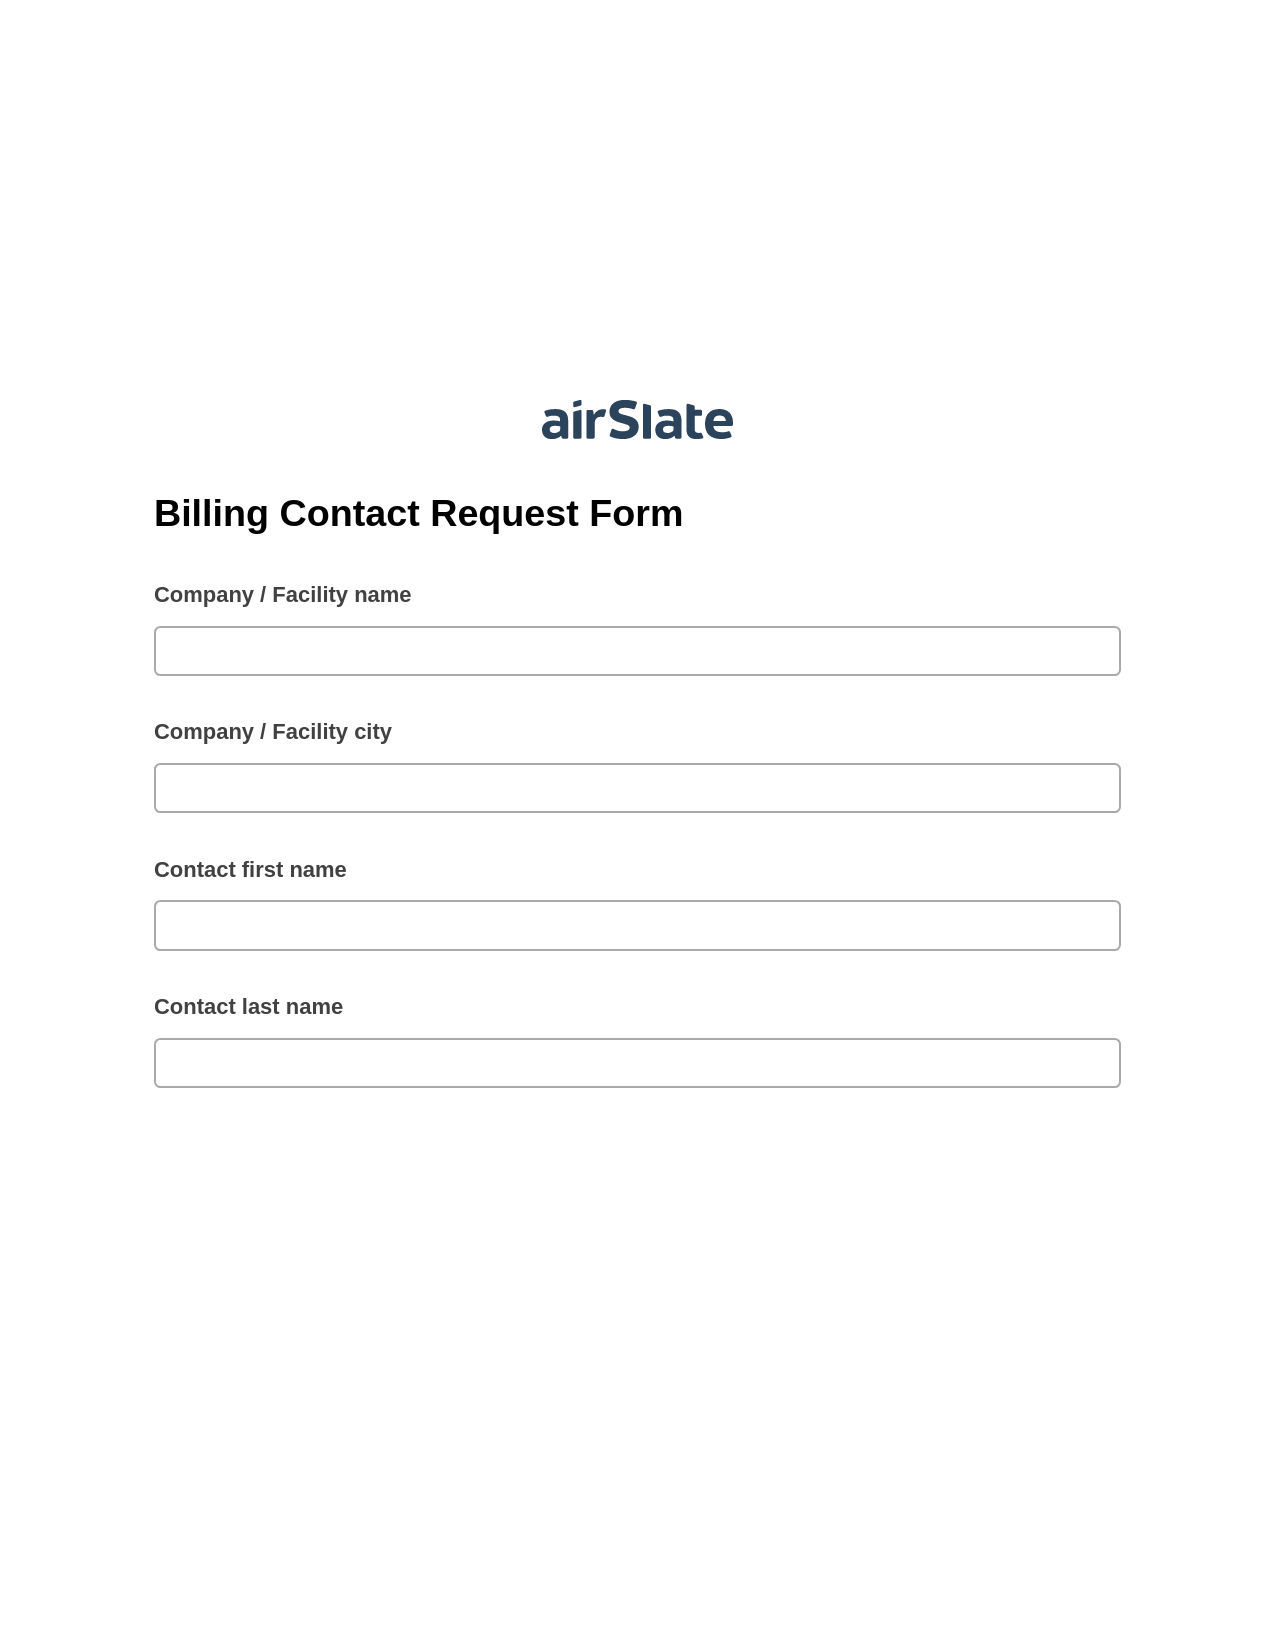 Multirole Billing Contact Request Form Pre-fill Slate from MS Dynamics 365 Records Bot, Jira Bot, Export to Smartsheet